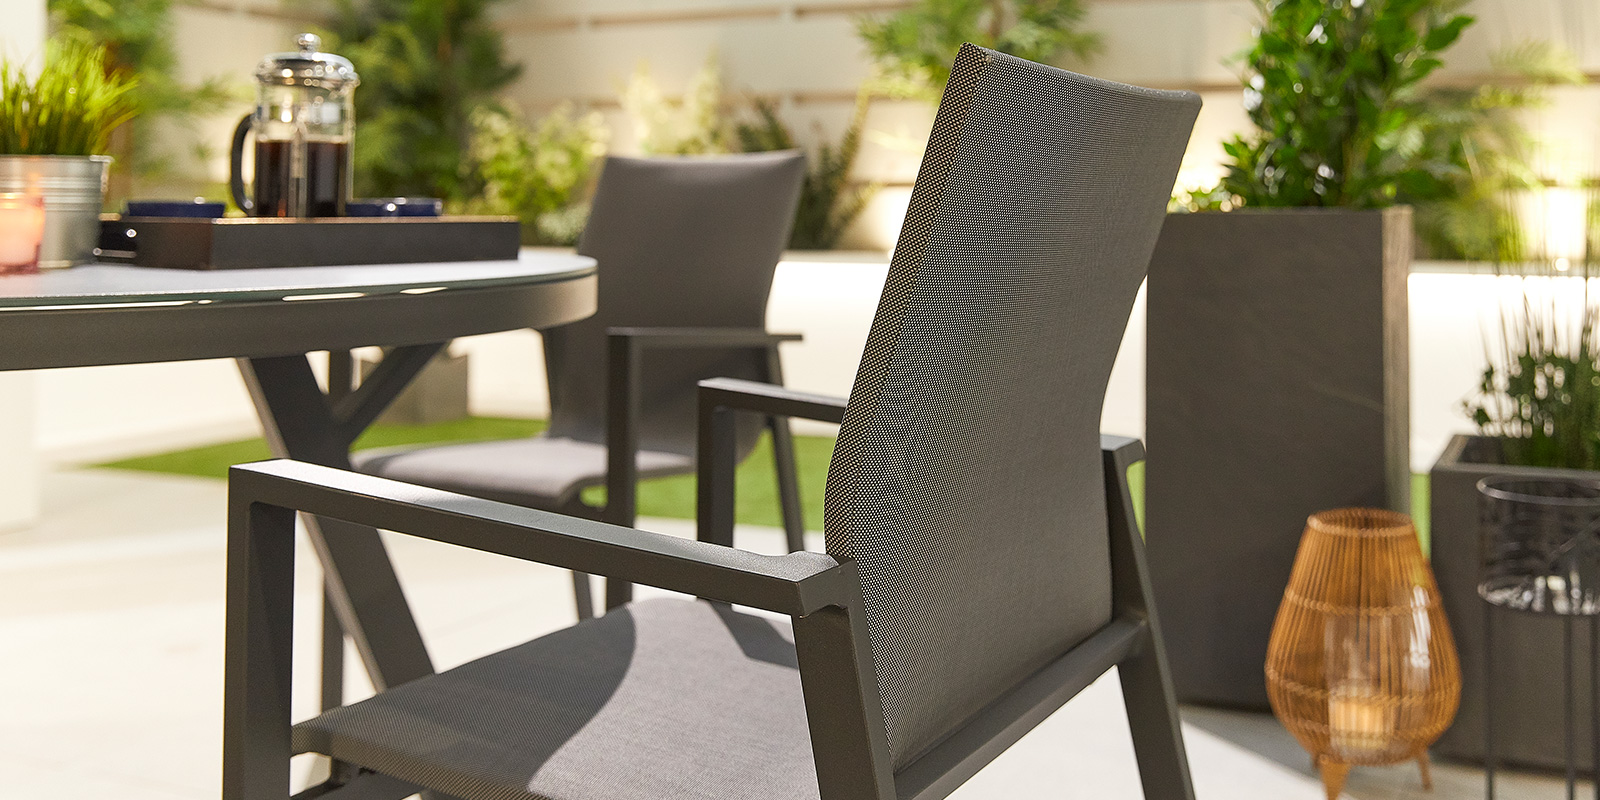 Buy Now, Pay Later on Garden Furniture